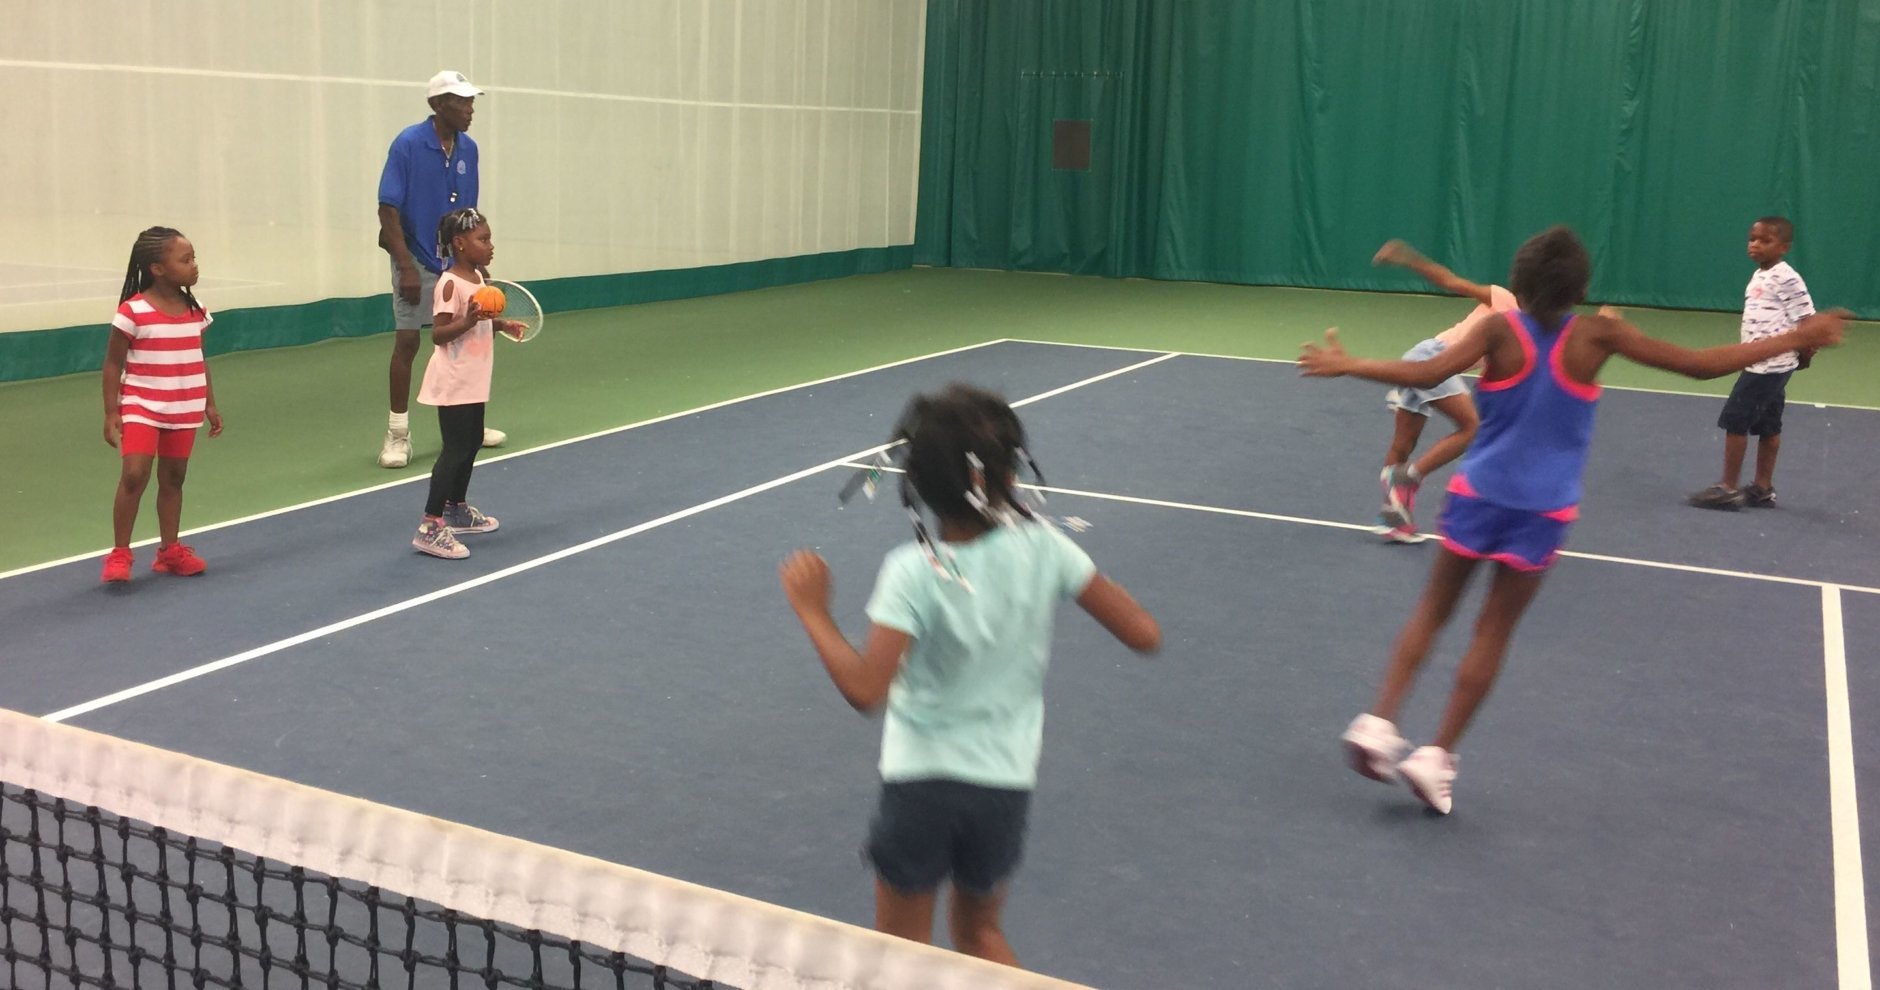 Playing dodge-ball gets children familiar with moving around quickly on a tennis court. (WTOP/Kristi King)